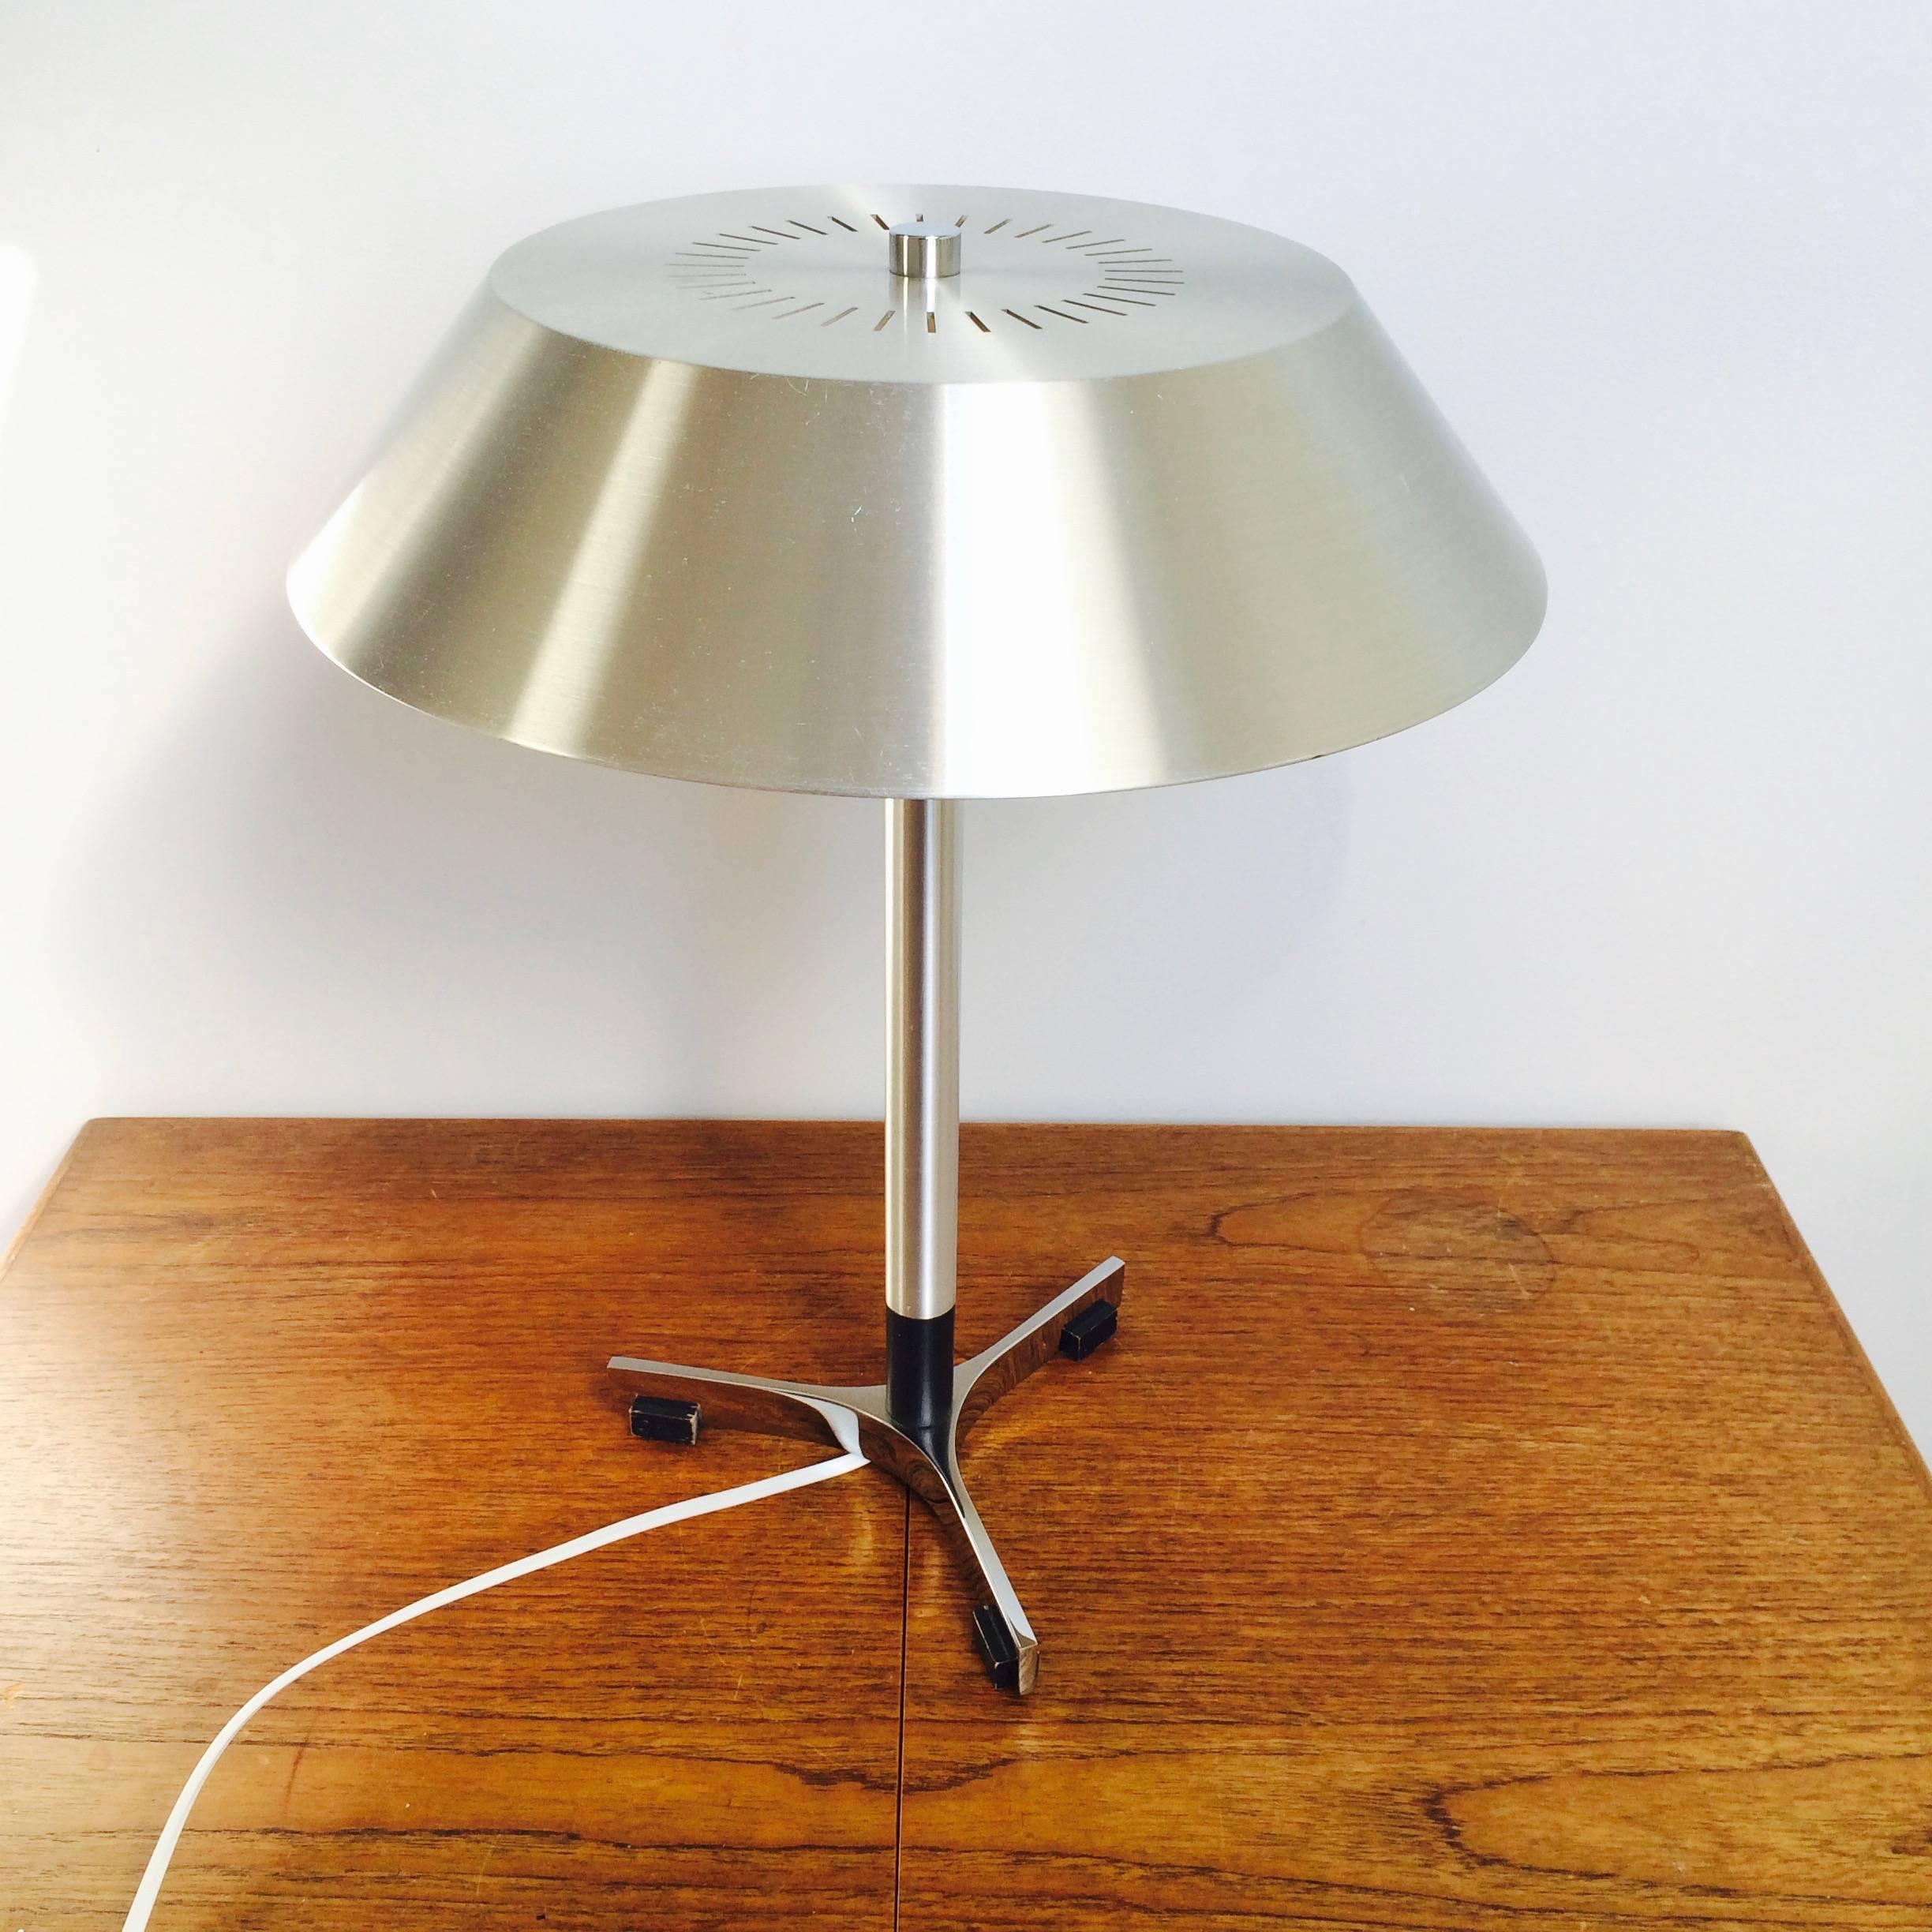 An iconic Jo Hammerborg design - President 

This table lamp is designed in 1966 in Denmark, and is by far one of the most iconic designs from Jo Hammerborg by Fog & Mørup. 
The lamp is really beautiful and simple in its design, and the materials